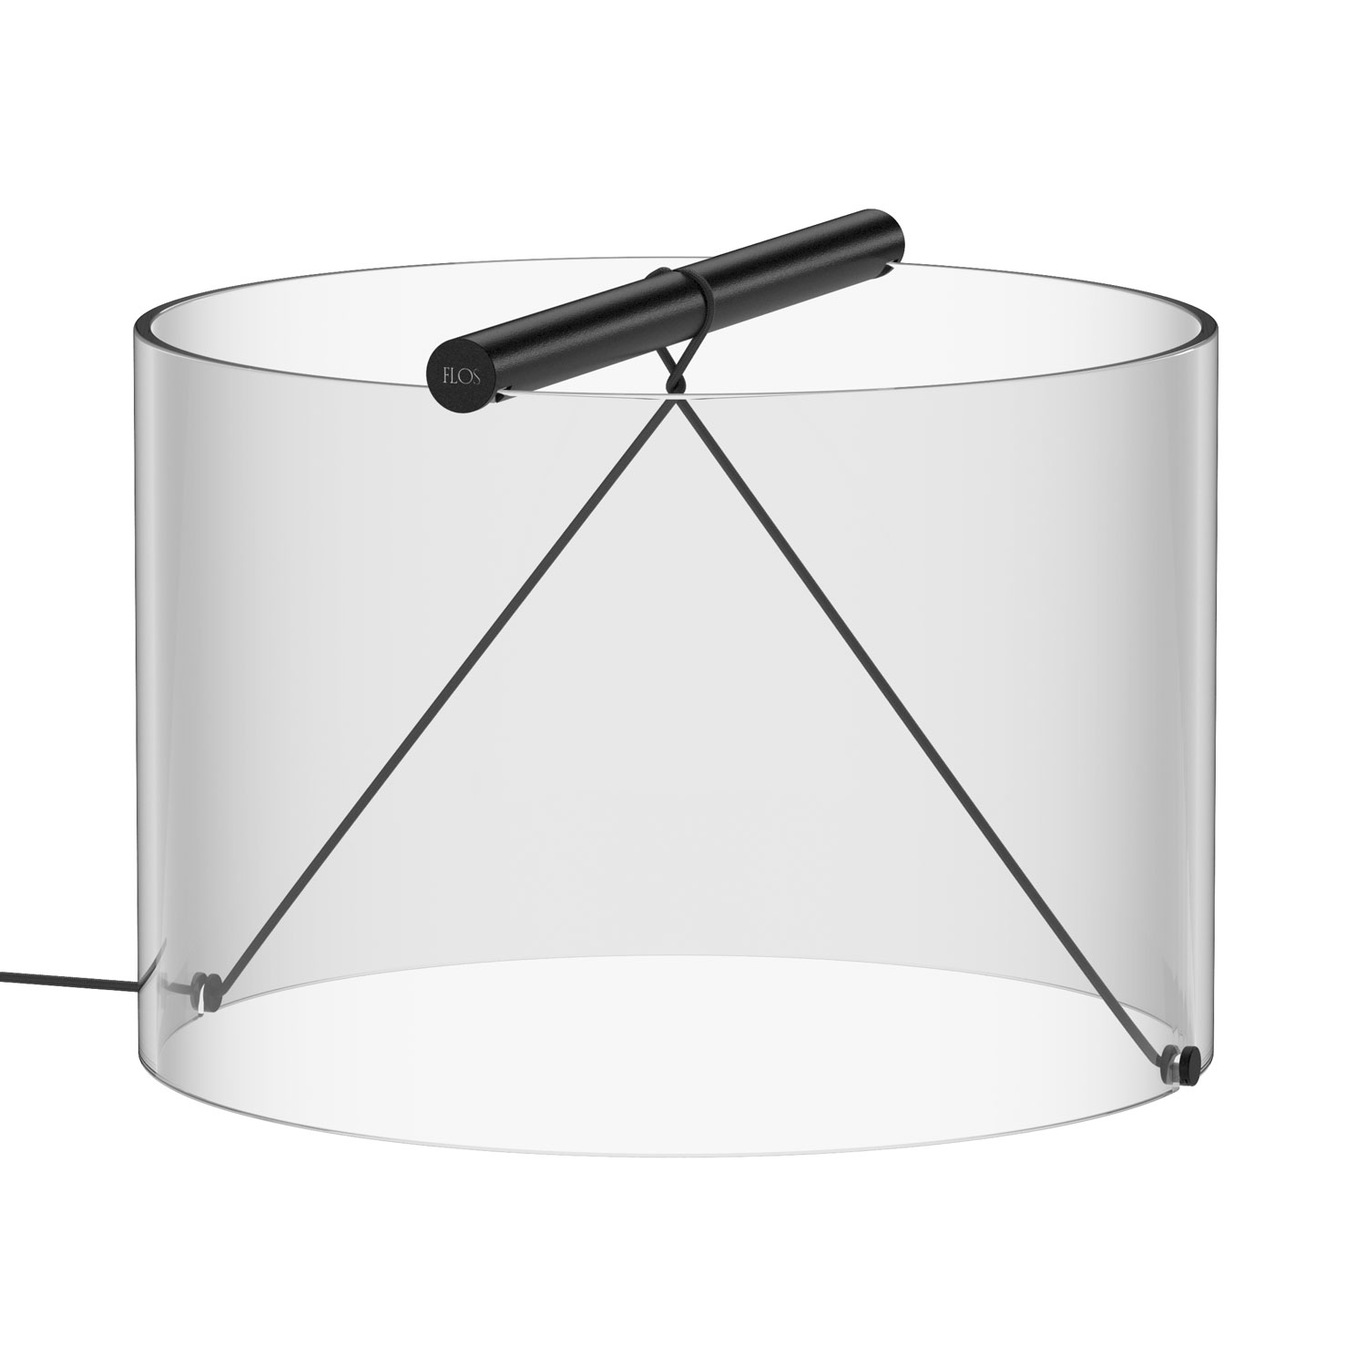 To-Tie T3 Table Lamp, Matte Black